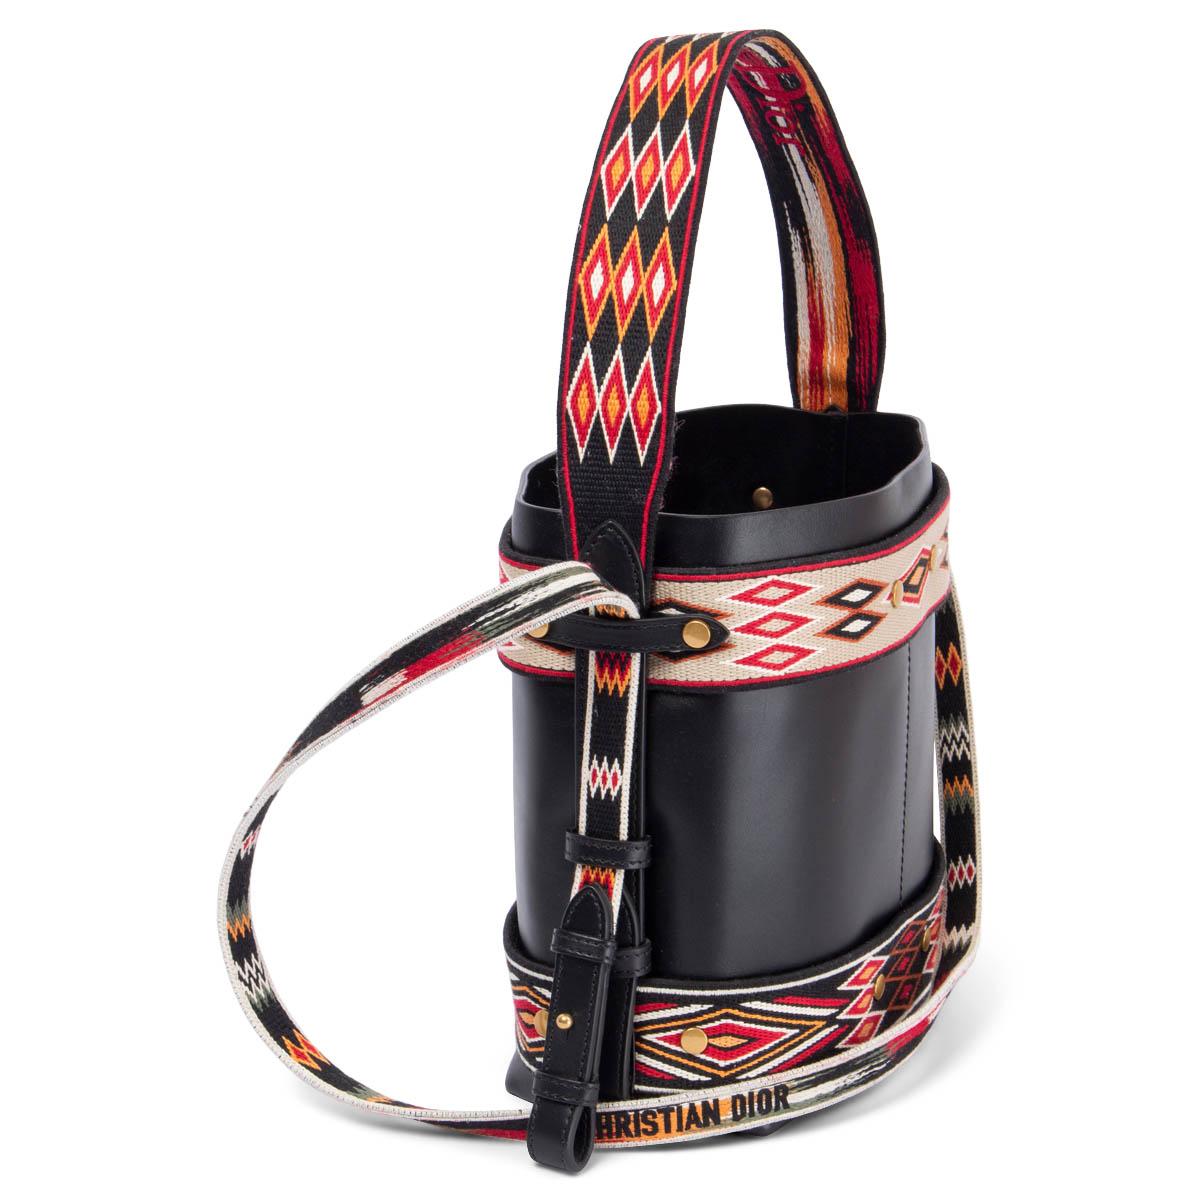 100% authentic Christian Dior Diorodeo Small Hobo small bucket style bag is crafted of smooth black leather, canvas and multicolor stitched fabric. Embroidered logo shoulder-strap. The bag opens to a black suede interior with three patch pockets.